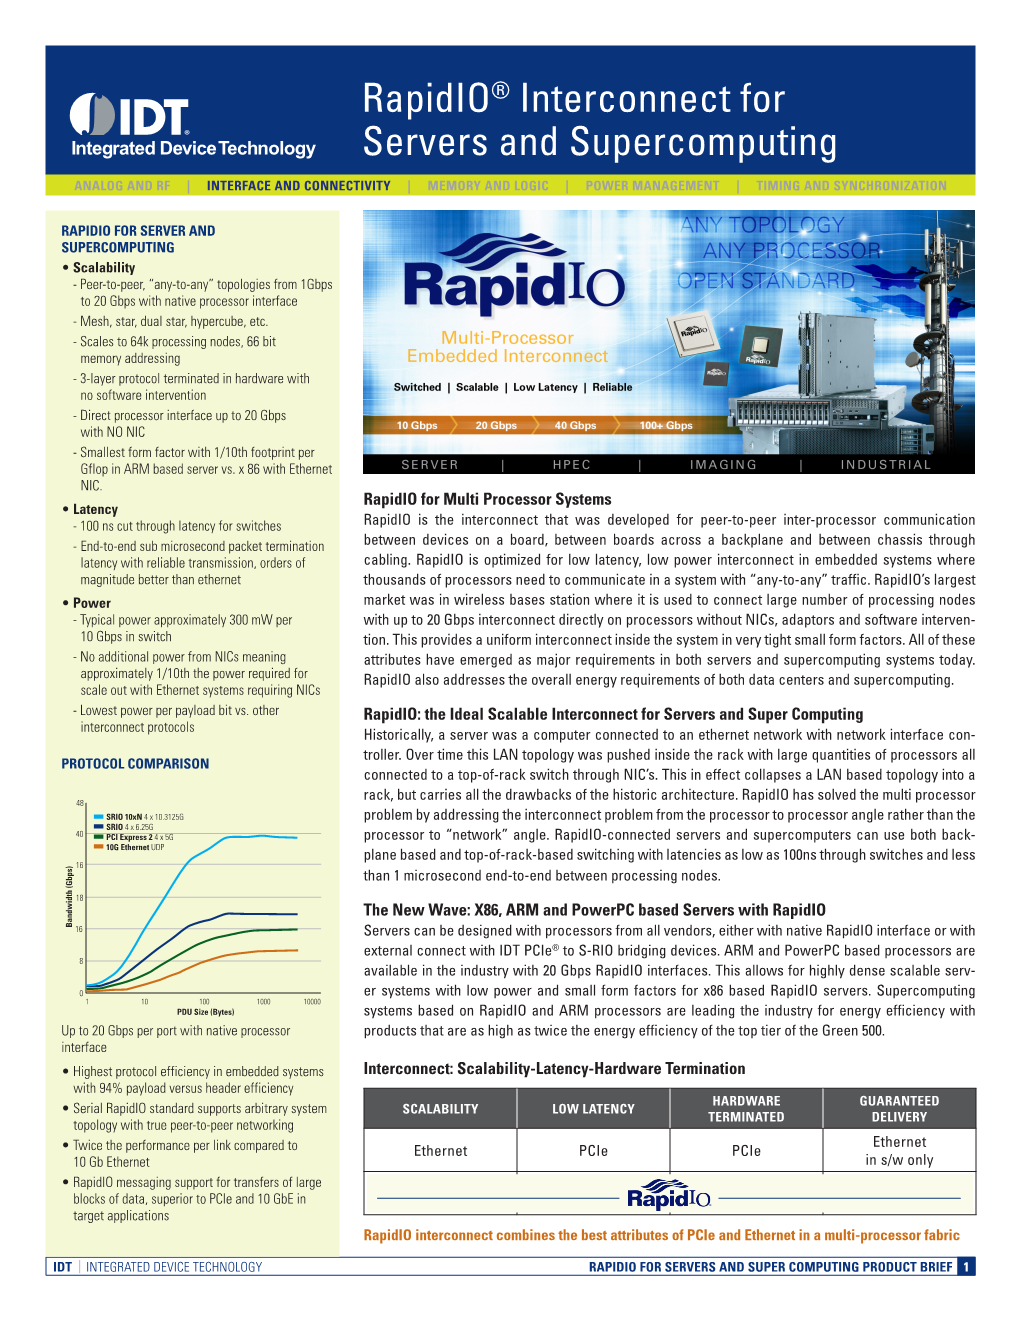 Rapidio® Interconnect for Servers and Supercomputing Product Brief